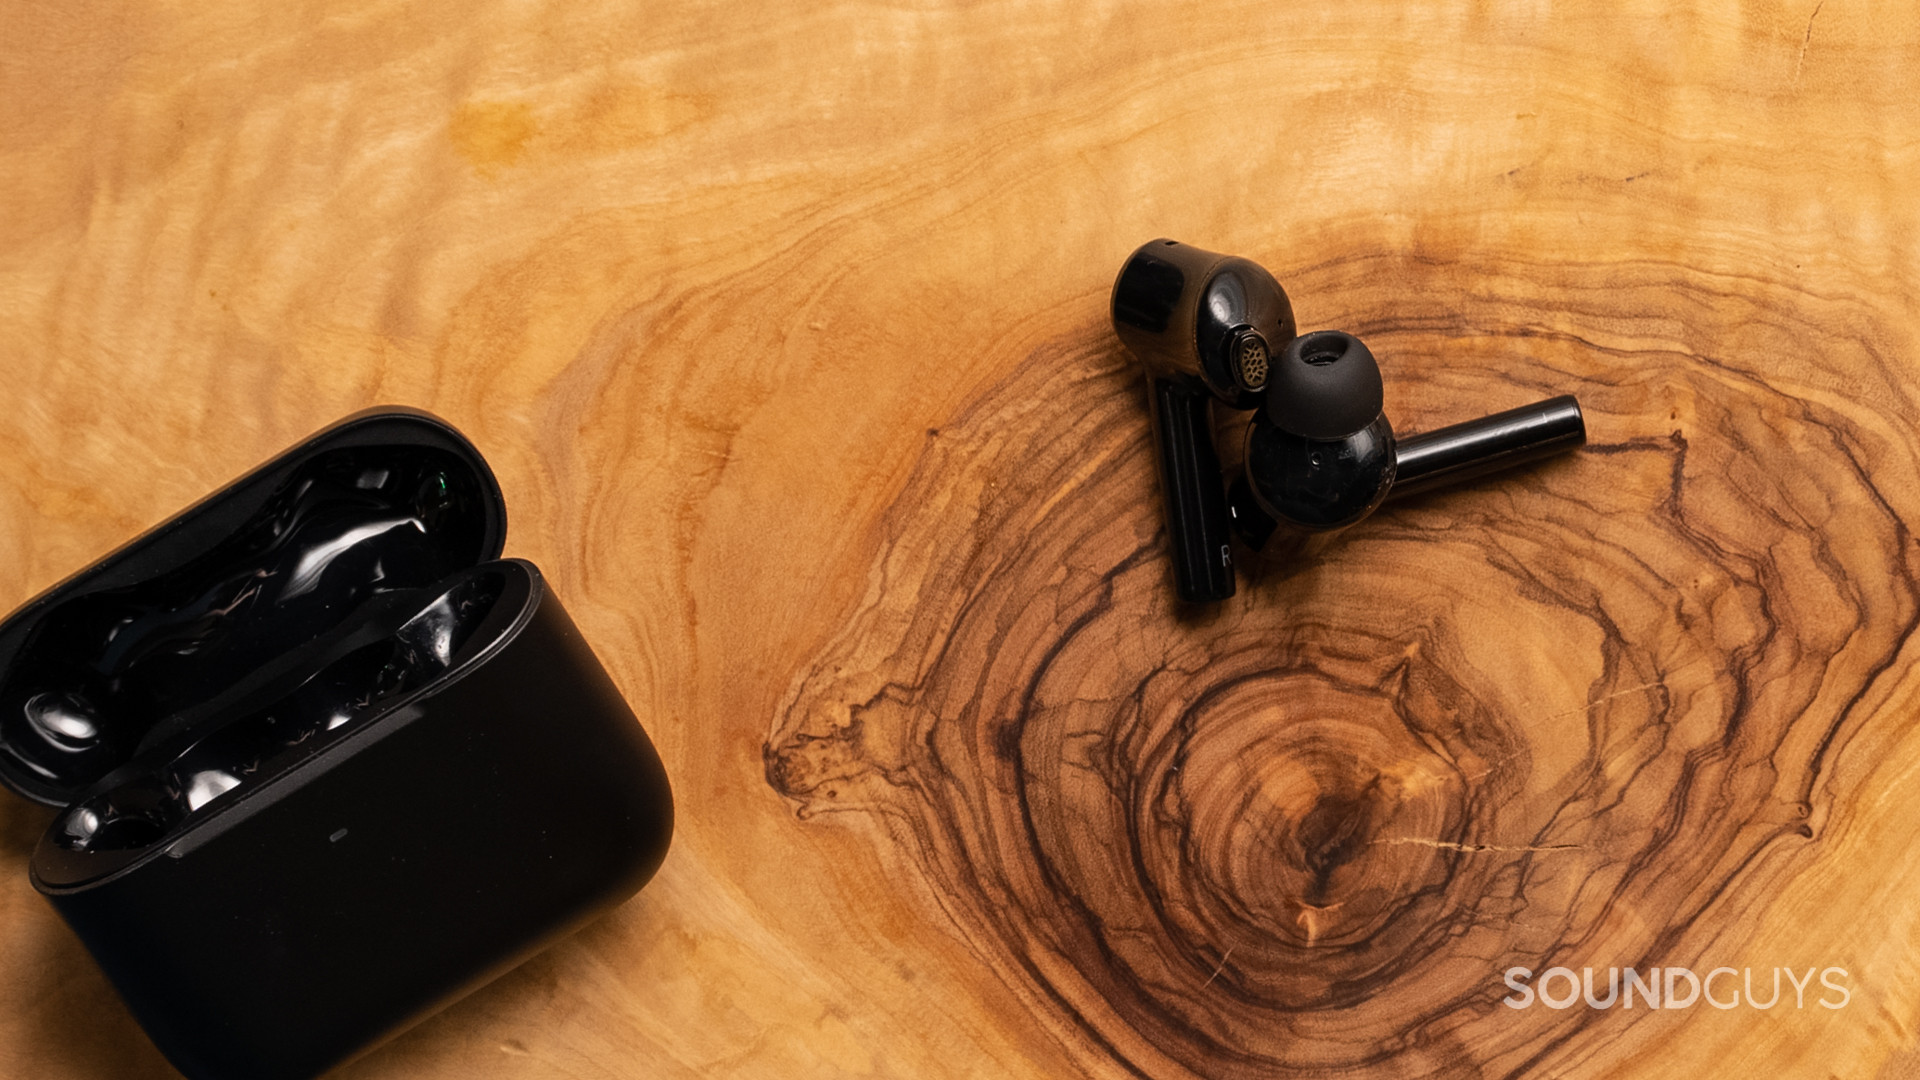 A photo of the Razer Hammerhead Pro Hyperspeed lying atop wood.